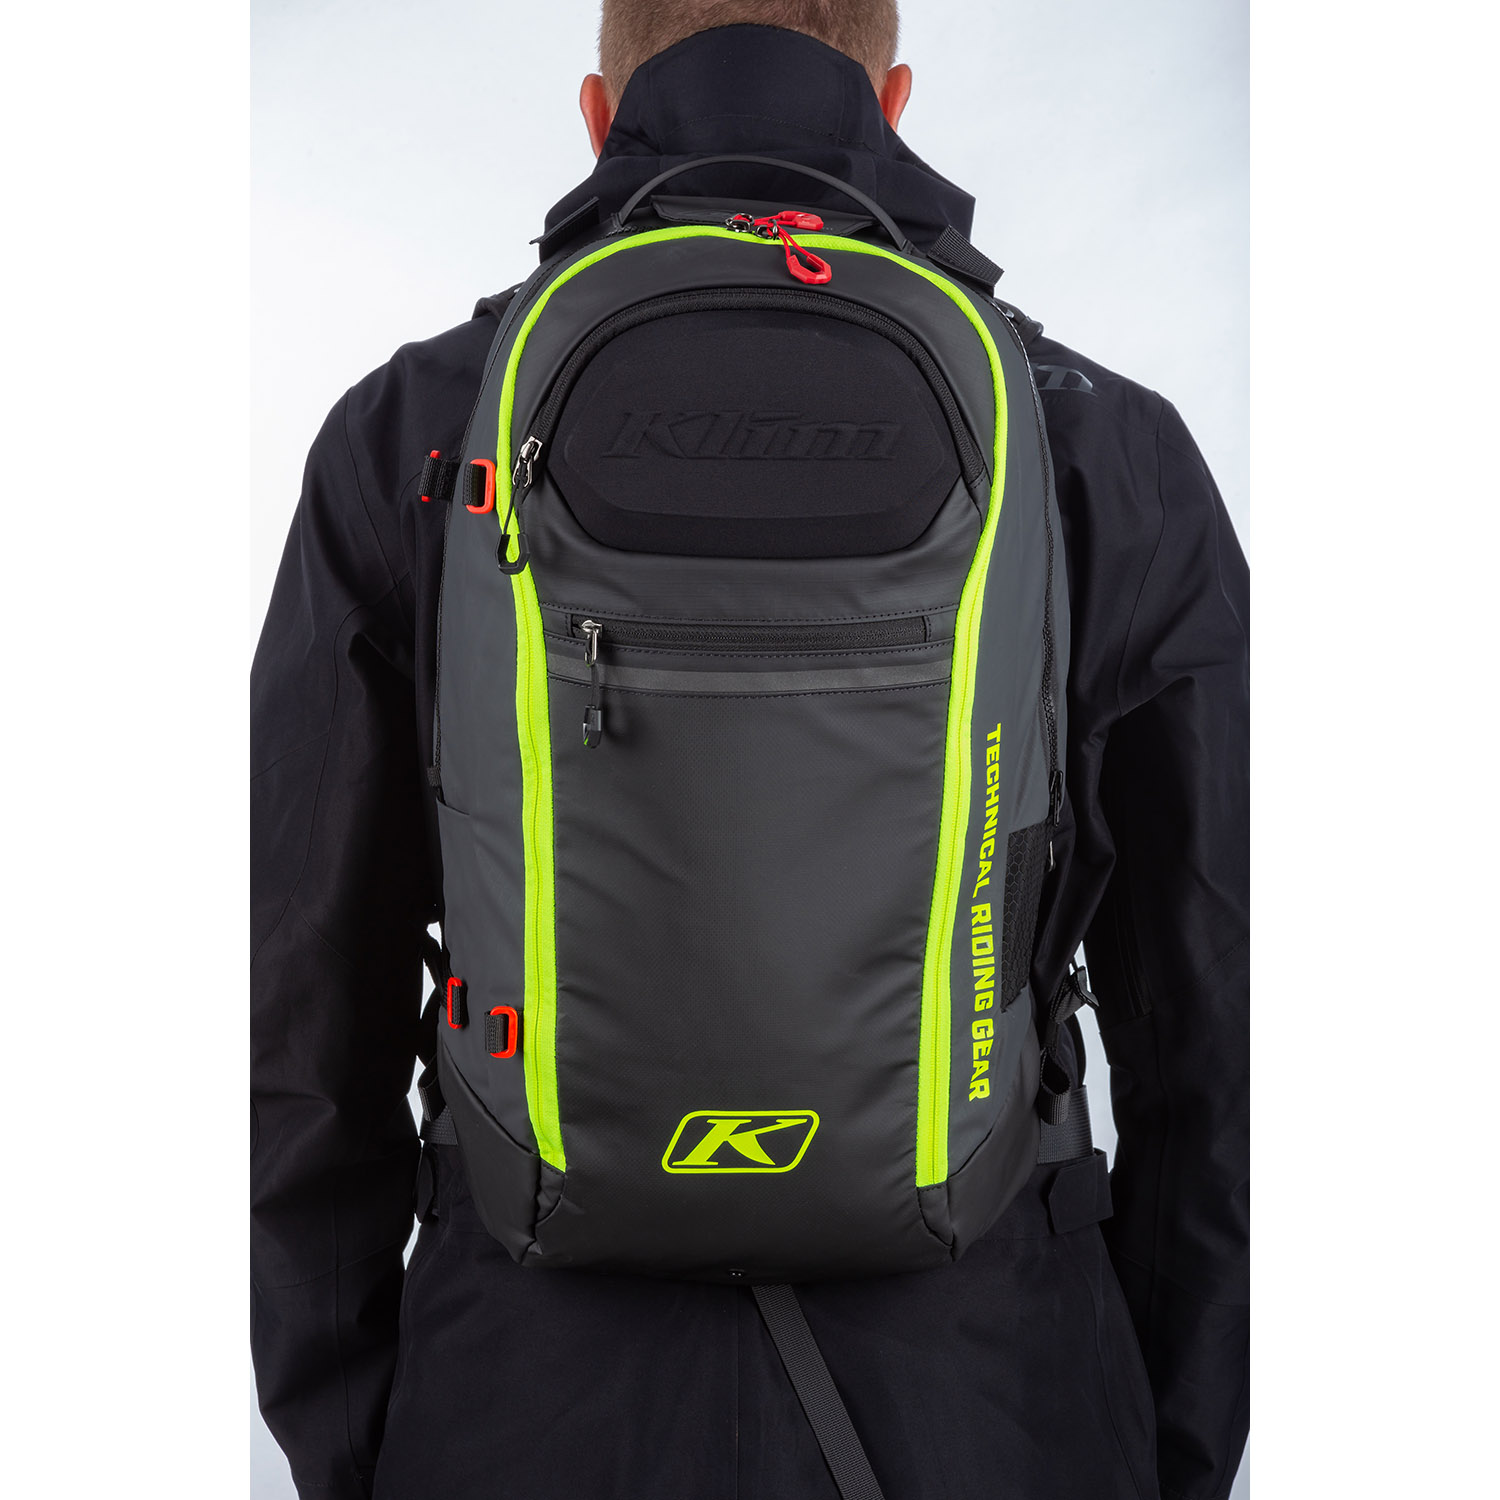 Atlas 14 Avalanche Airbag Pack